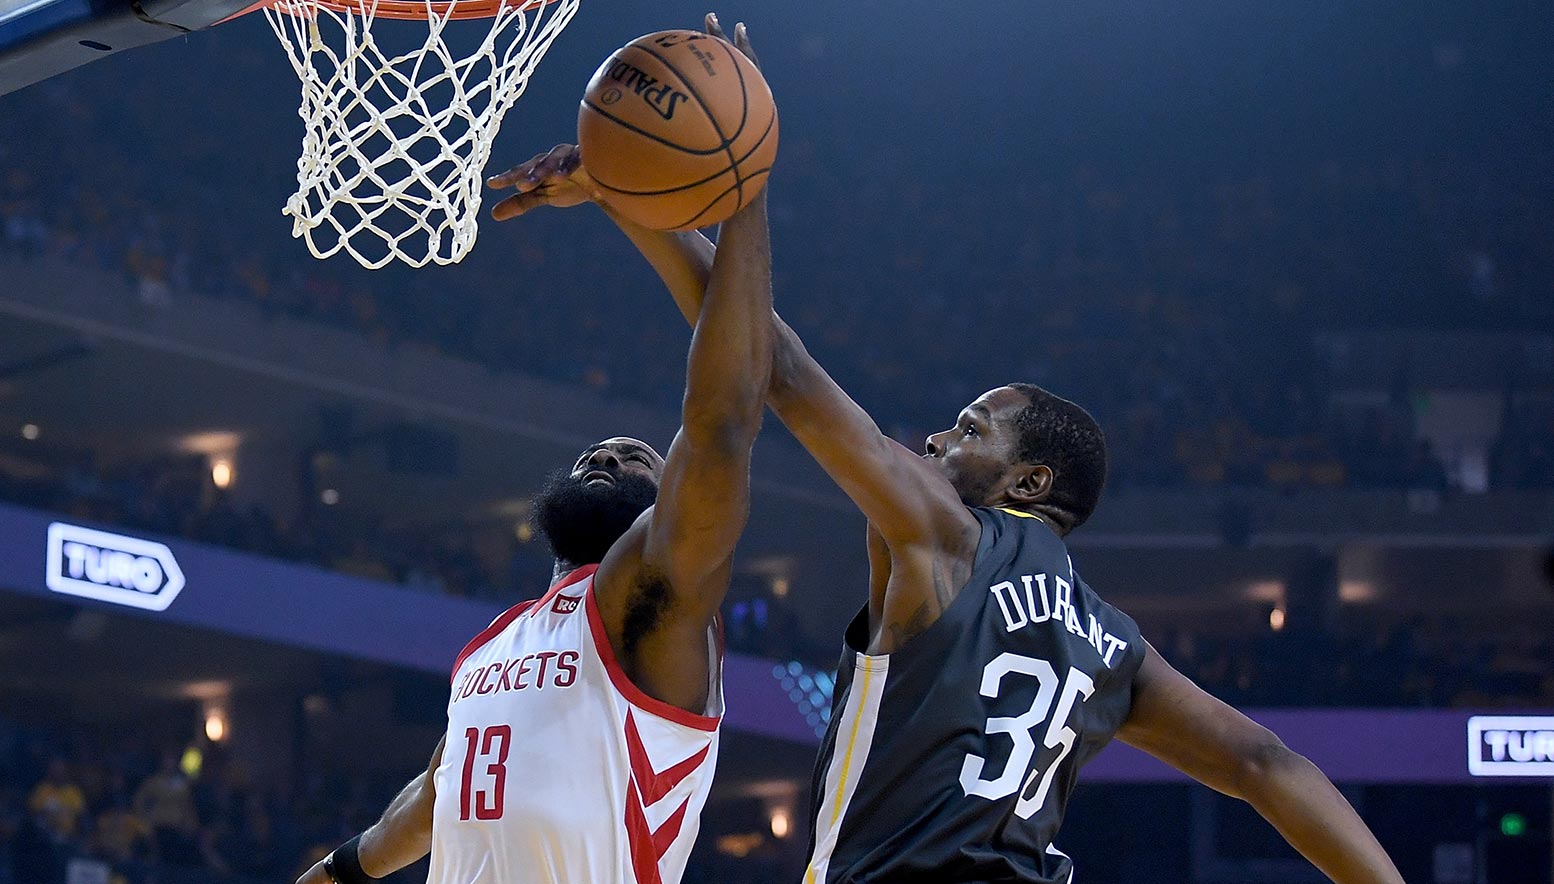 Kevin Durant contests the shot of James Harden